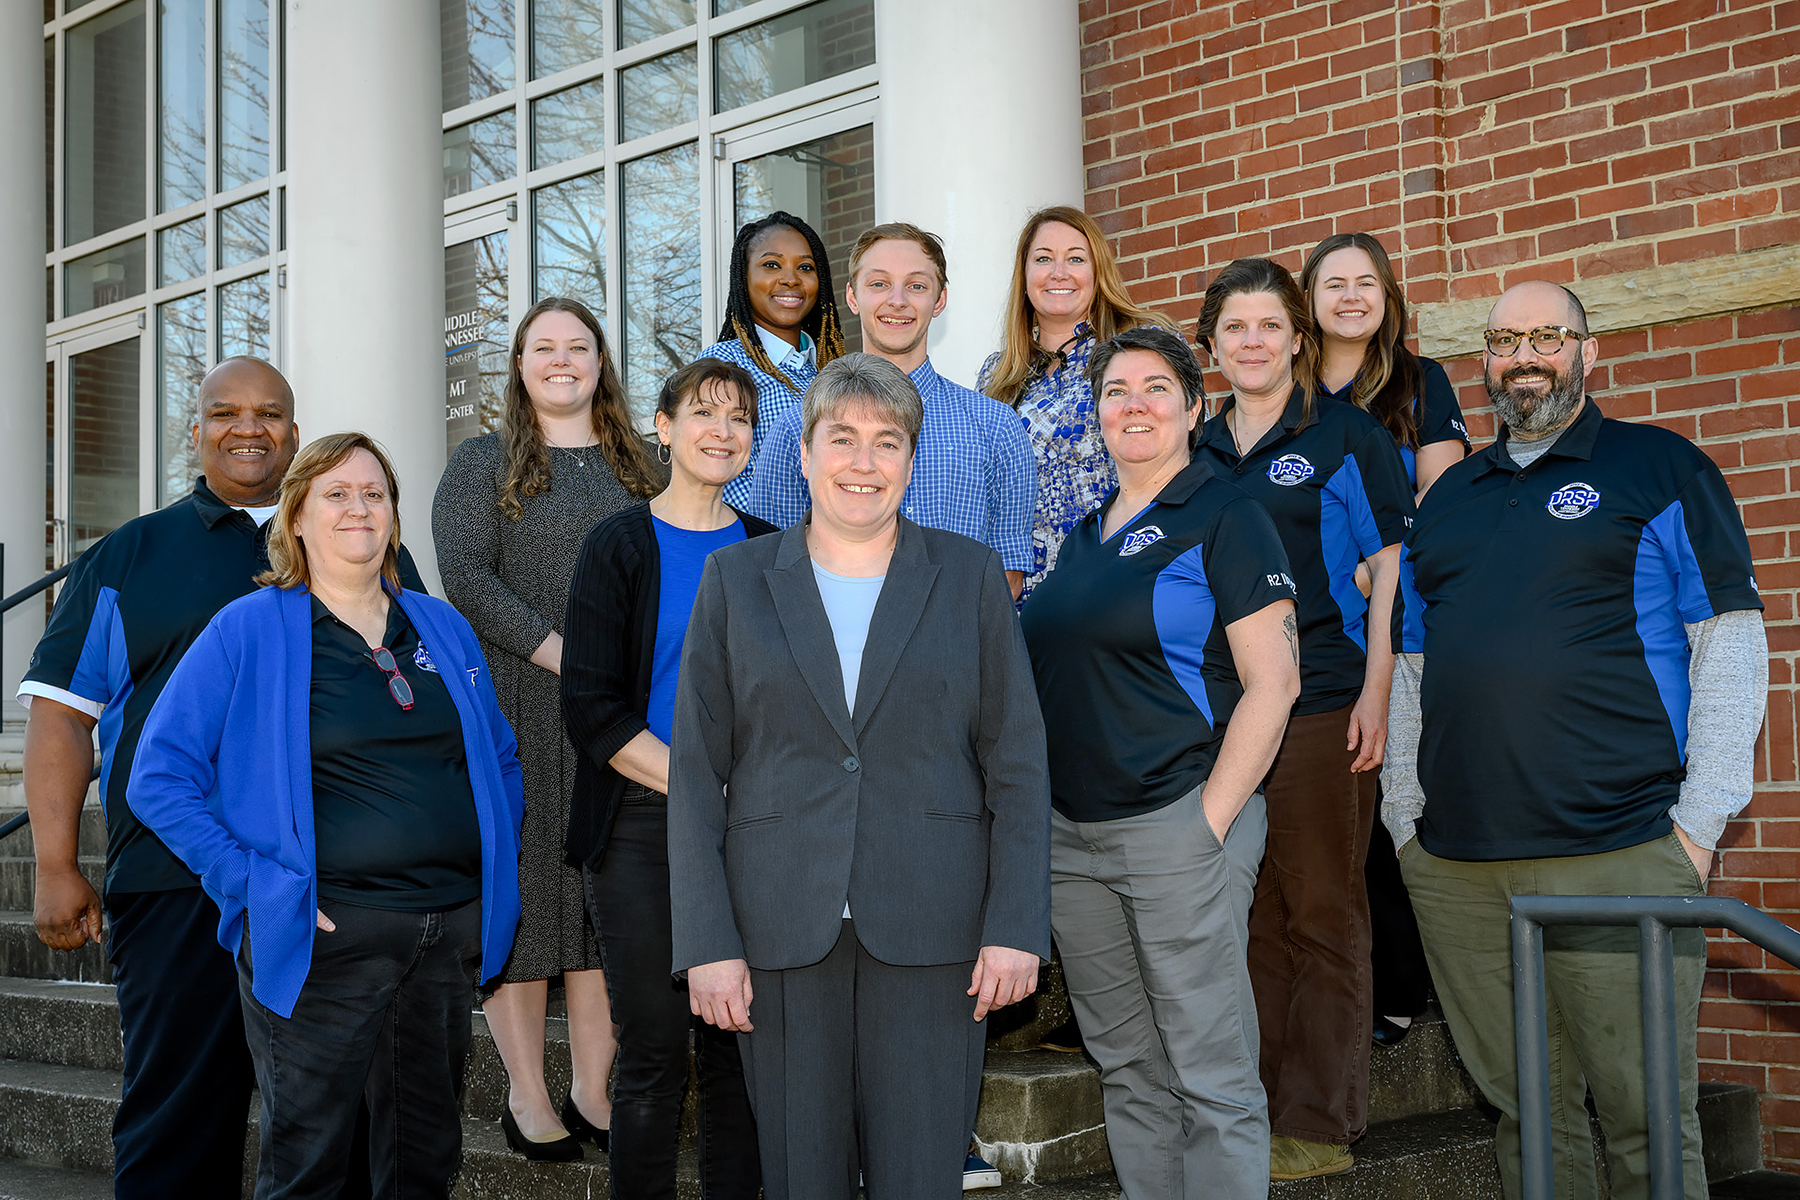 Rachel McGinnis, front row and center, new director of the Office of Research and Sponsored Programs at Middle Tennessee State University, joins her office staff for a photo in front of the Sam Ingram Building on campus on Feb. 13, 2023. McGinnis says she wants the campus community to think of the office as the “go-to resource” for research on campus. Standing in the second row, from left, are Lisa Lee, Julie Darbonne, Michelle Willard and John Sousa; third row, from left, are Keith Palmer, Katie Medrano, Jacob Grones and Janie Becker; and back row, from left, are Aanu Adekoya, Jamie Burris and Kelsey Benton. (MTSU photo by J. Intintoli)